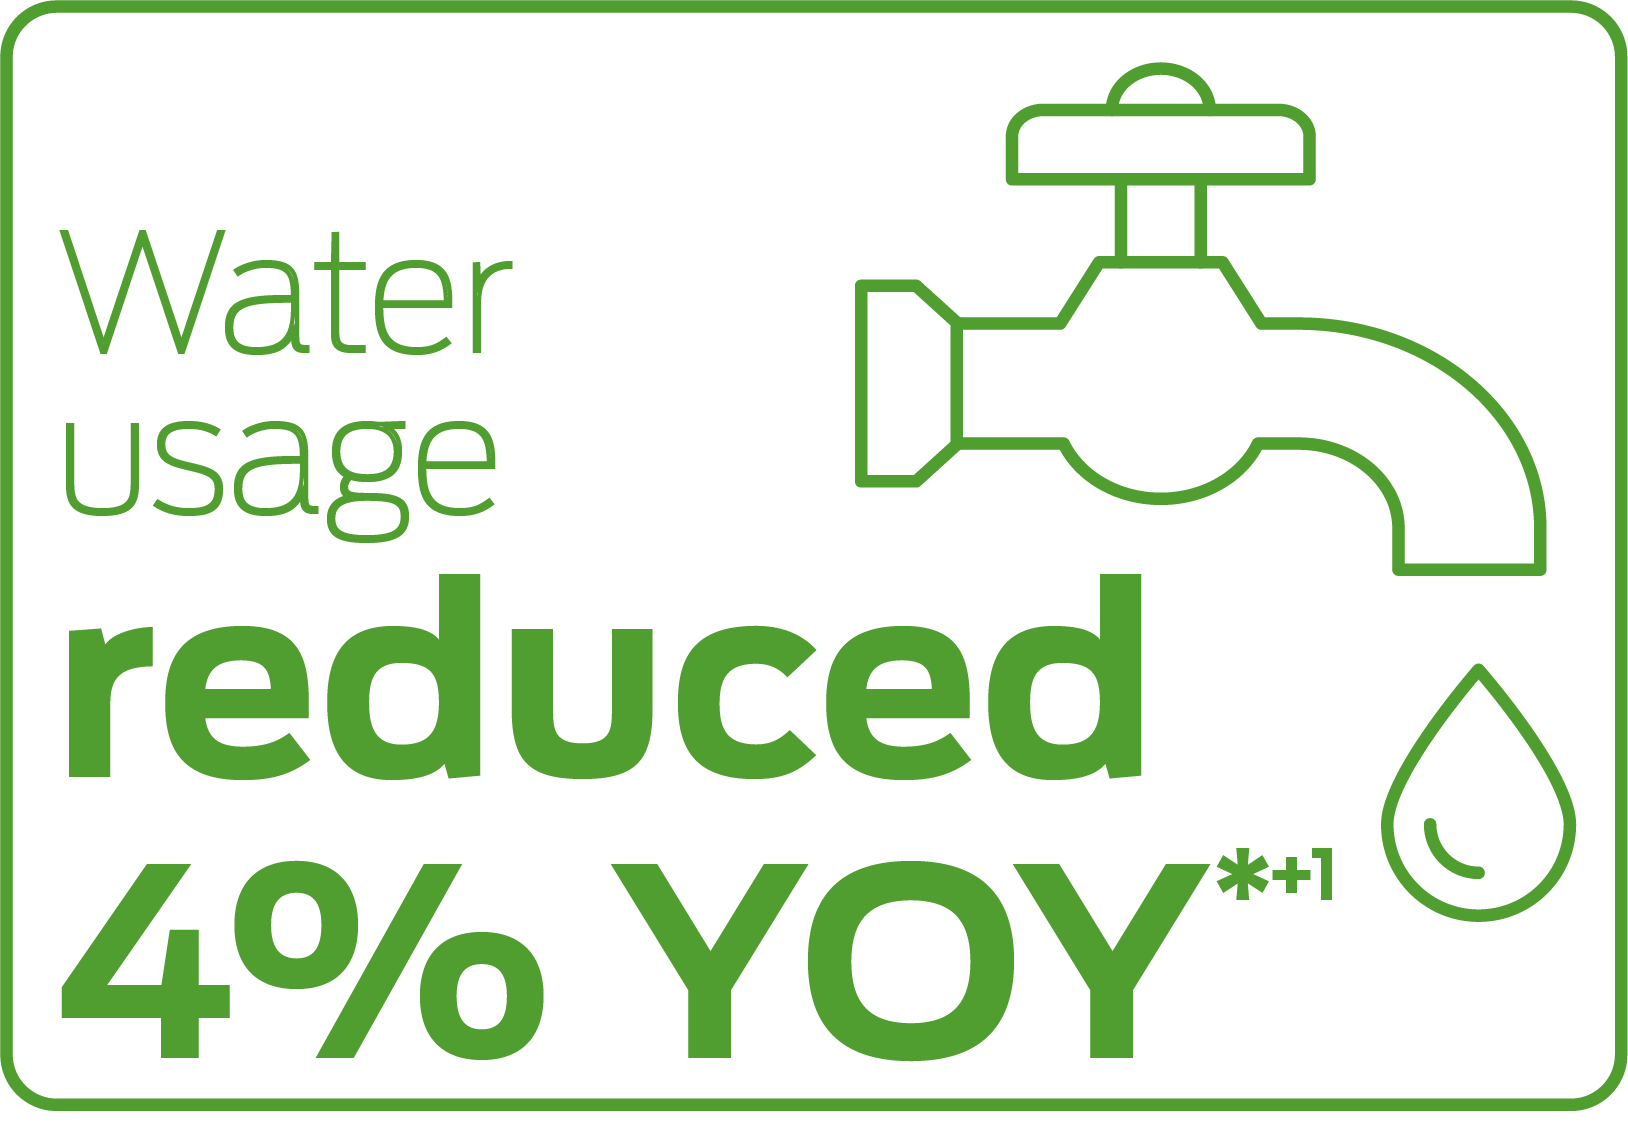 Water usage reduced 4% YOY